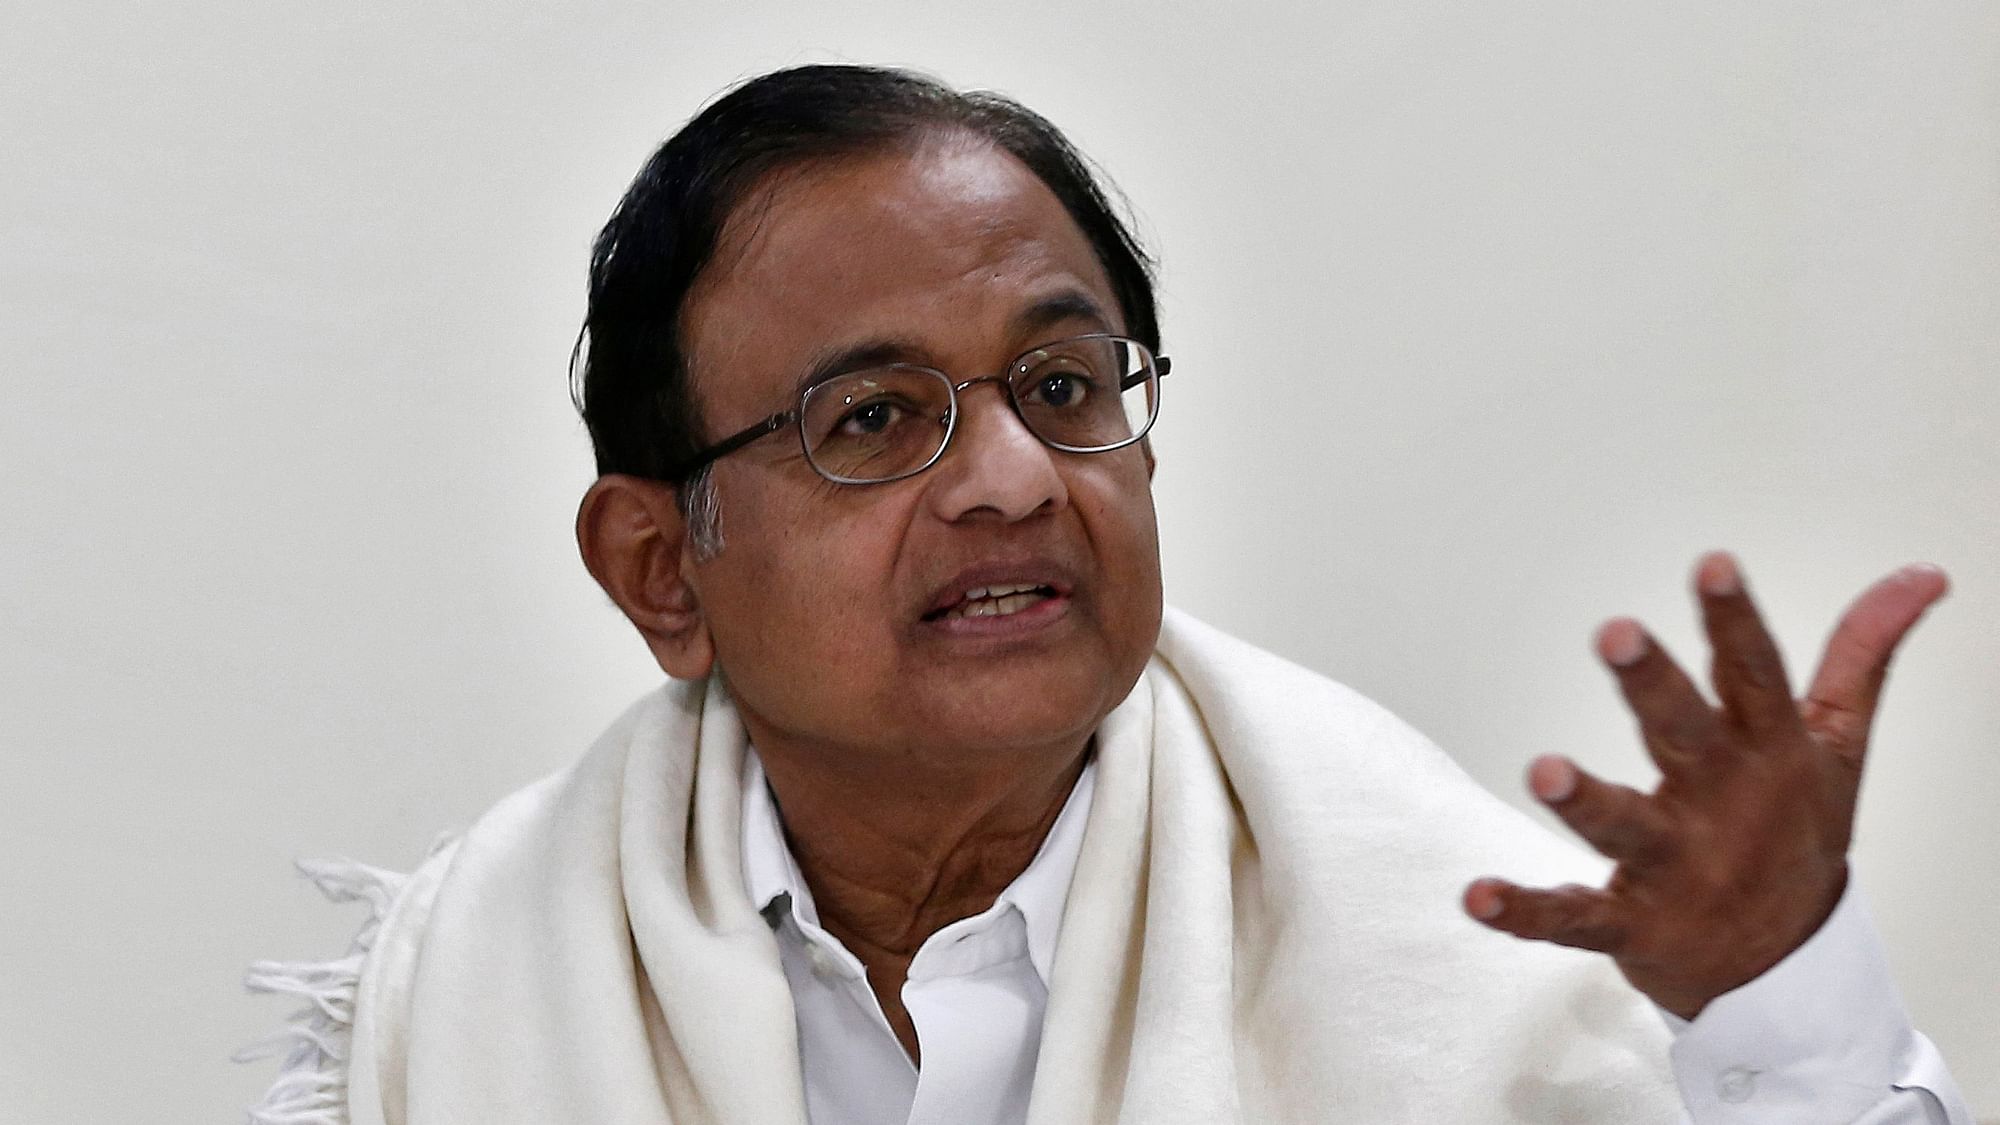 P Chidambaram’s statement was recorded under the Prevention of Money Laundering Act (PMLA).